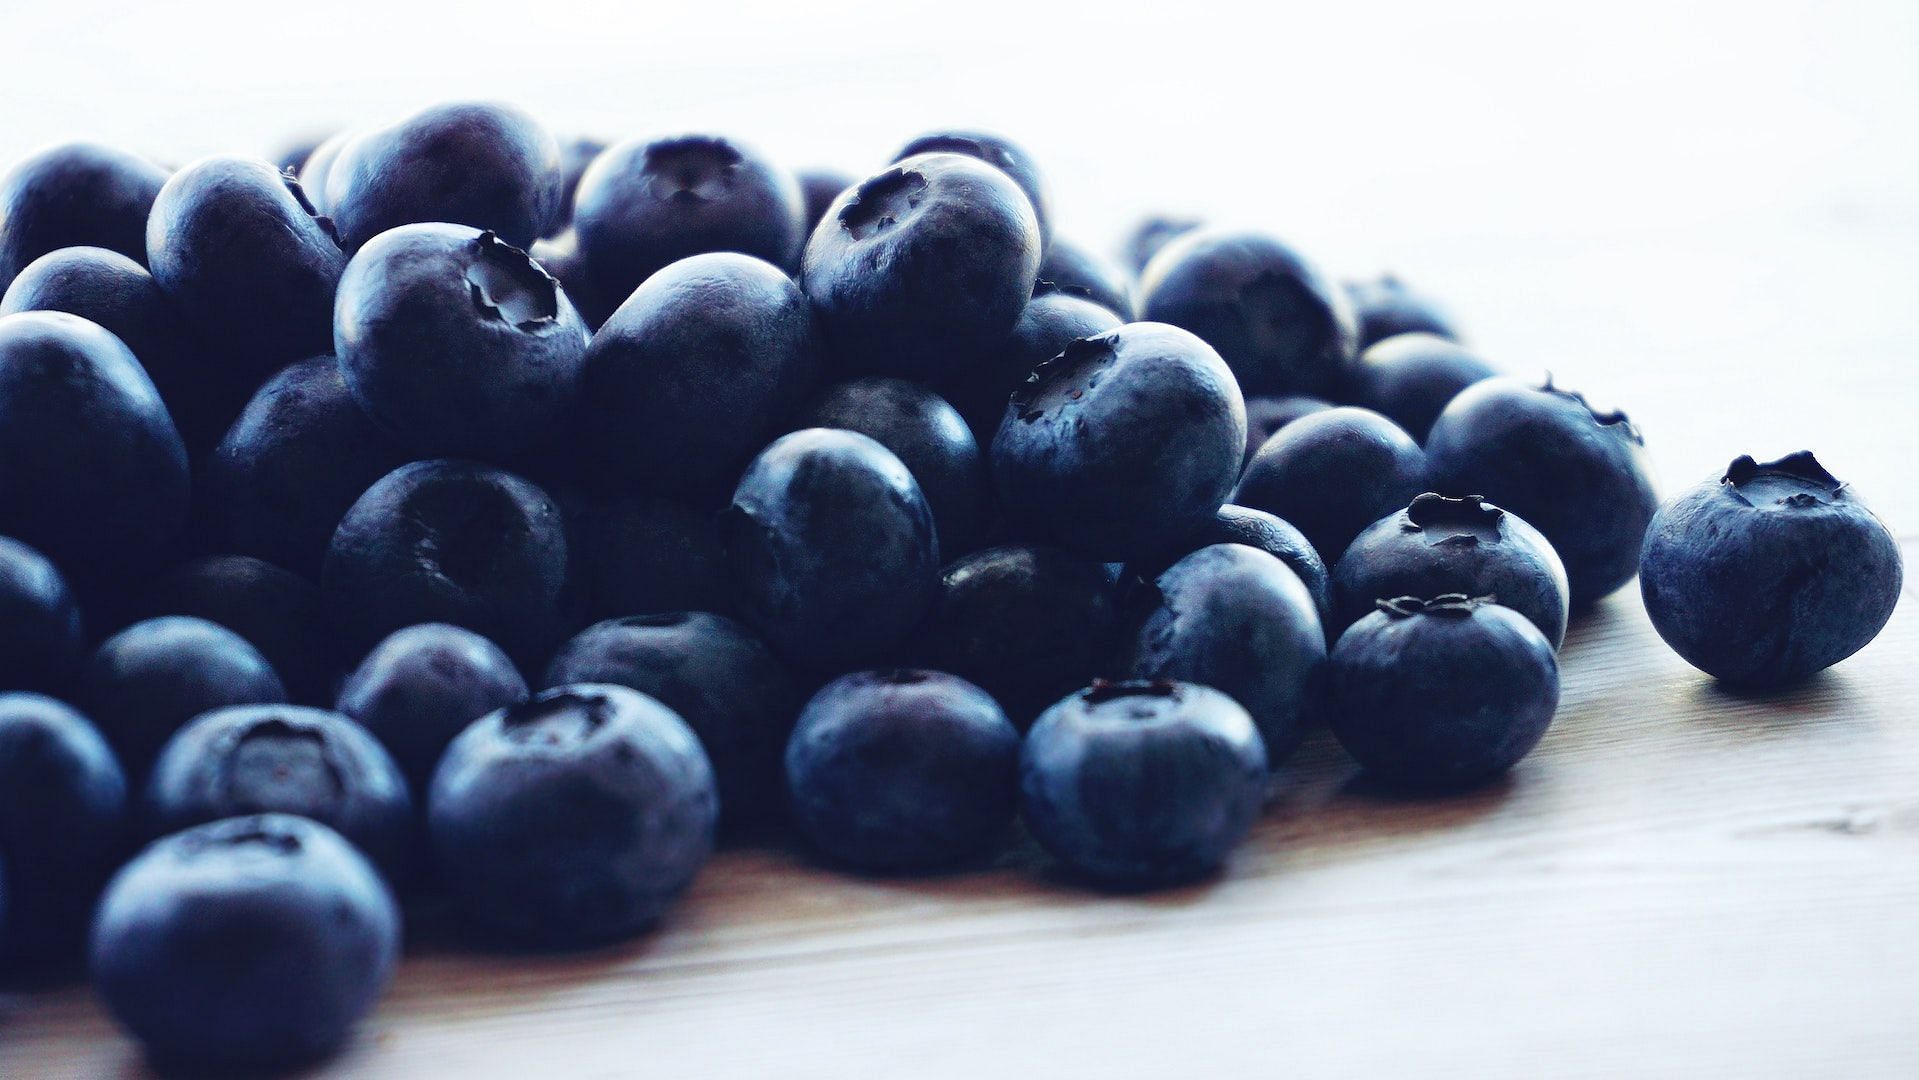 Blueberries contain several minerals and vitamins. (Photo via Pexels/Suzy Hazelwood)